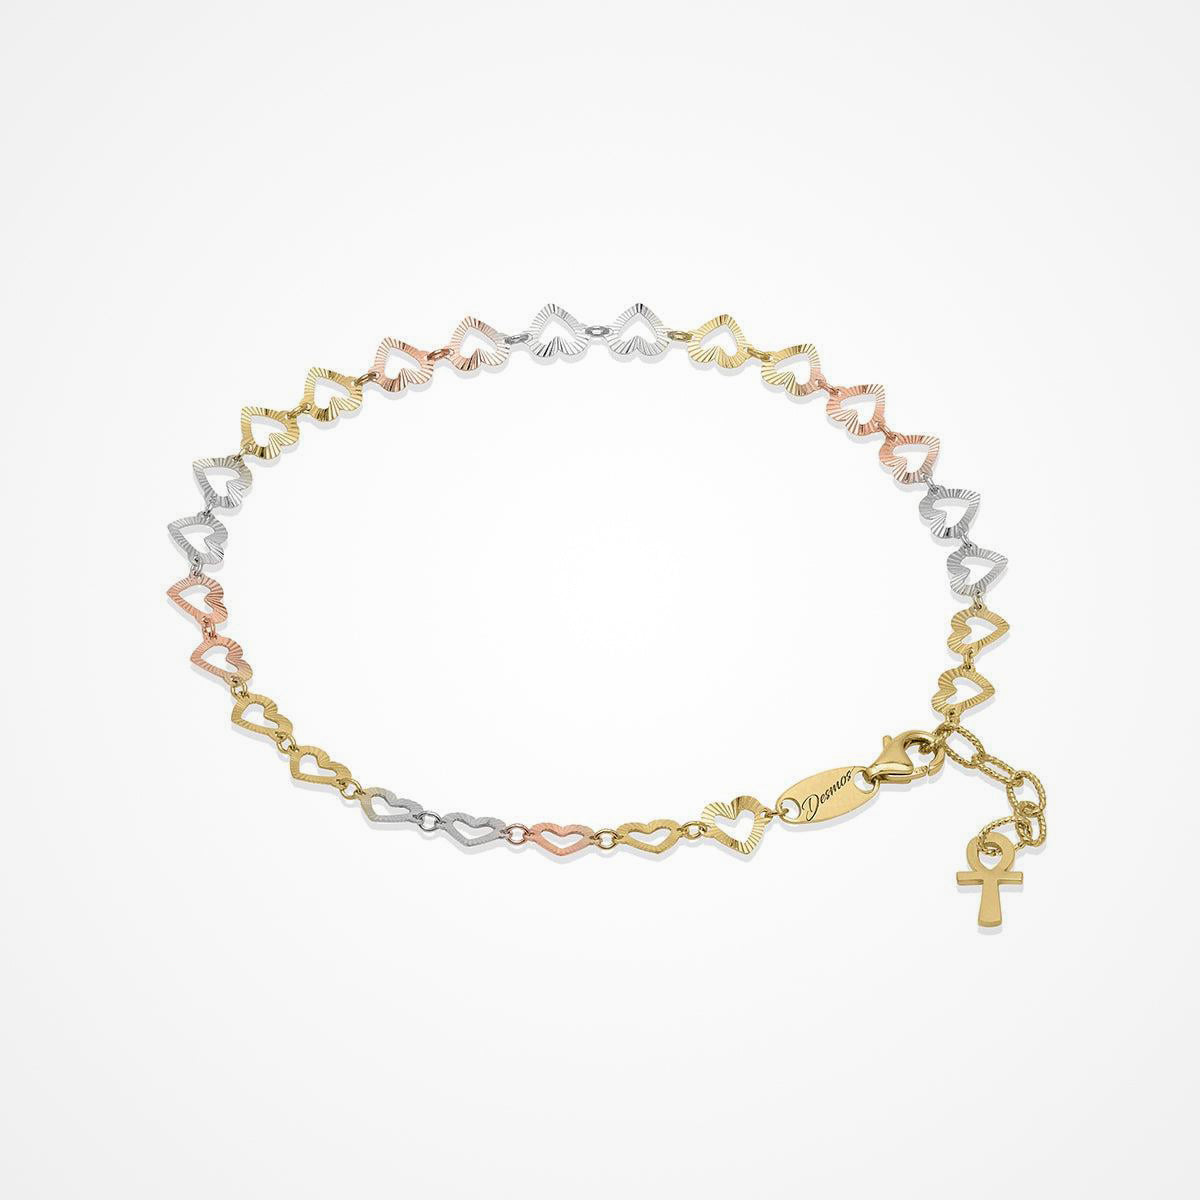 ARTE CUORE ANKLET